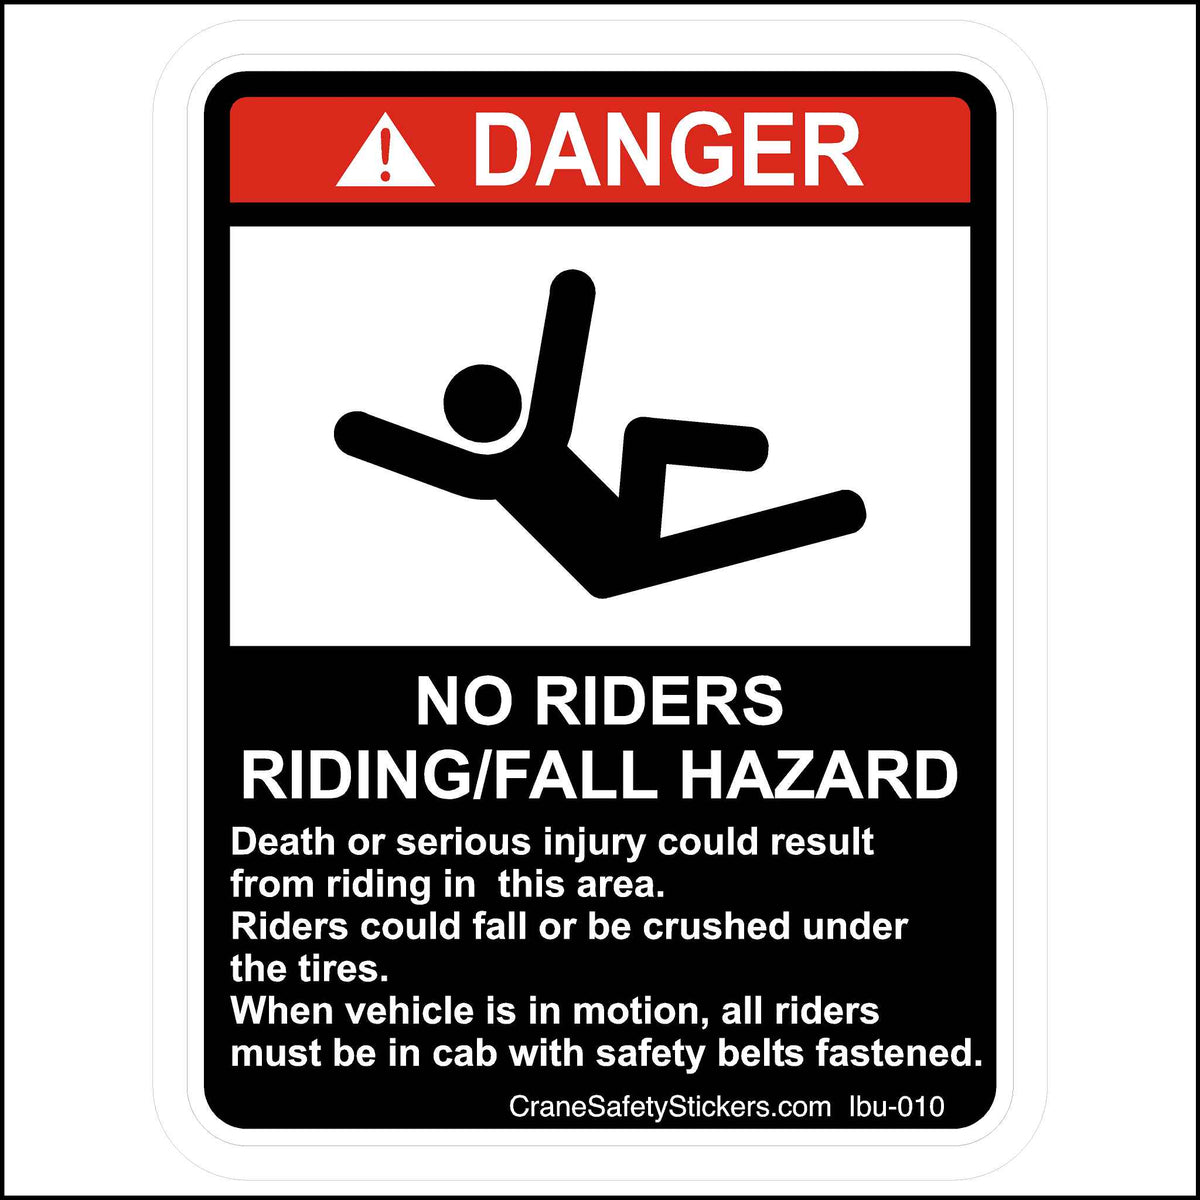 No Riders Fall Hazard Sticker Printed With. DANGER  NO RIDERS  RIDING / FALL HAZARD  Death or serious injury could result from riding in this area. Riders could fall or be crushed under the tires. When the vehicle is in motion, all riders must be in the cab with safety belts fastened.